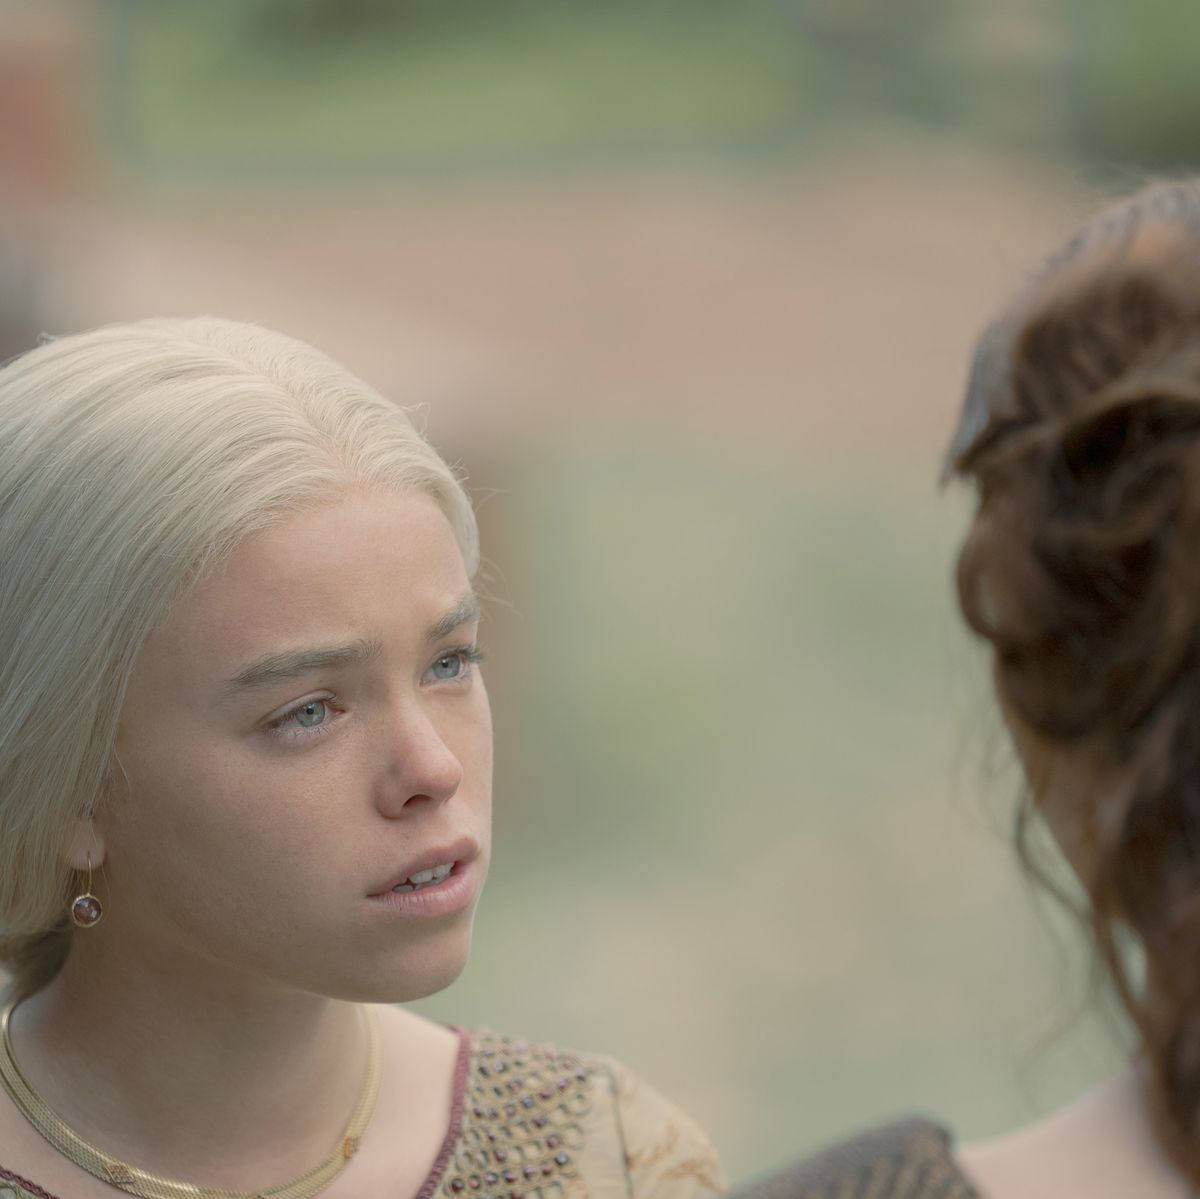 House of the Dragon: HBO's Game of Thrones spinoff needs more incest.